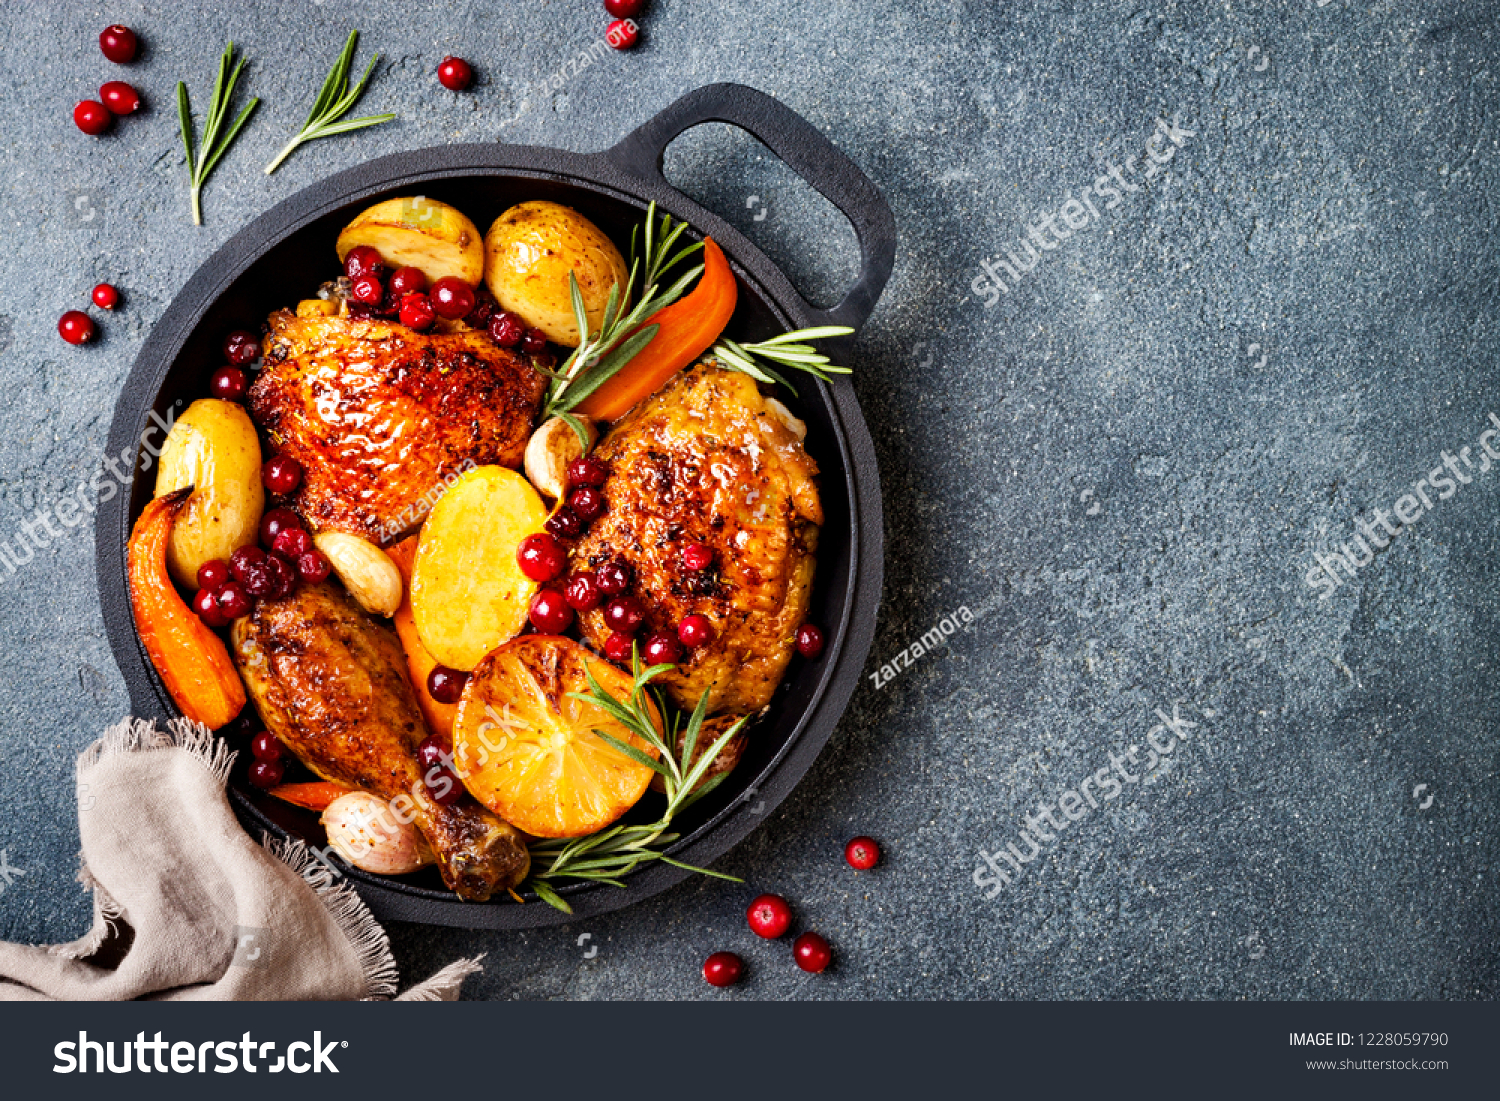 Roasted chicken legs with root vegetables, lemon, garlic, cranberry and rosemary on pan, on black slate stone background #1228059790